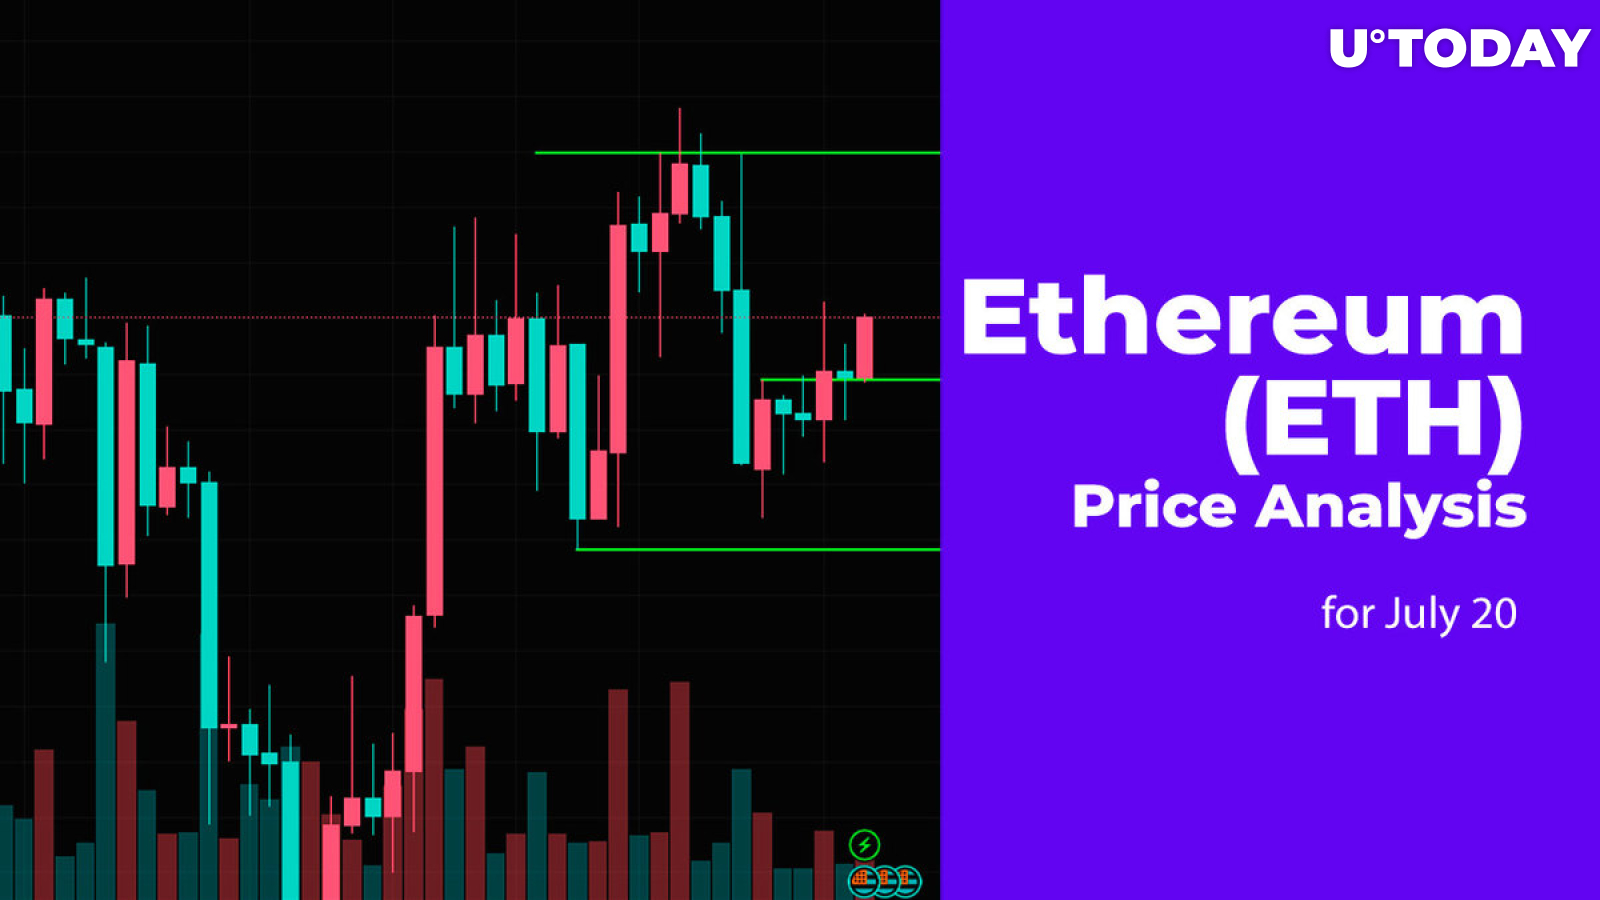 Ethereum (ETH) Price Analysis for July 20